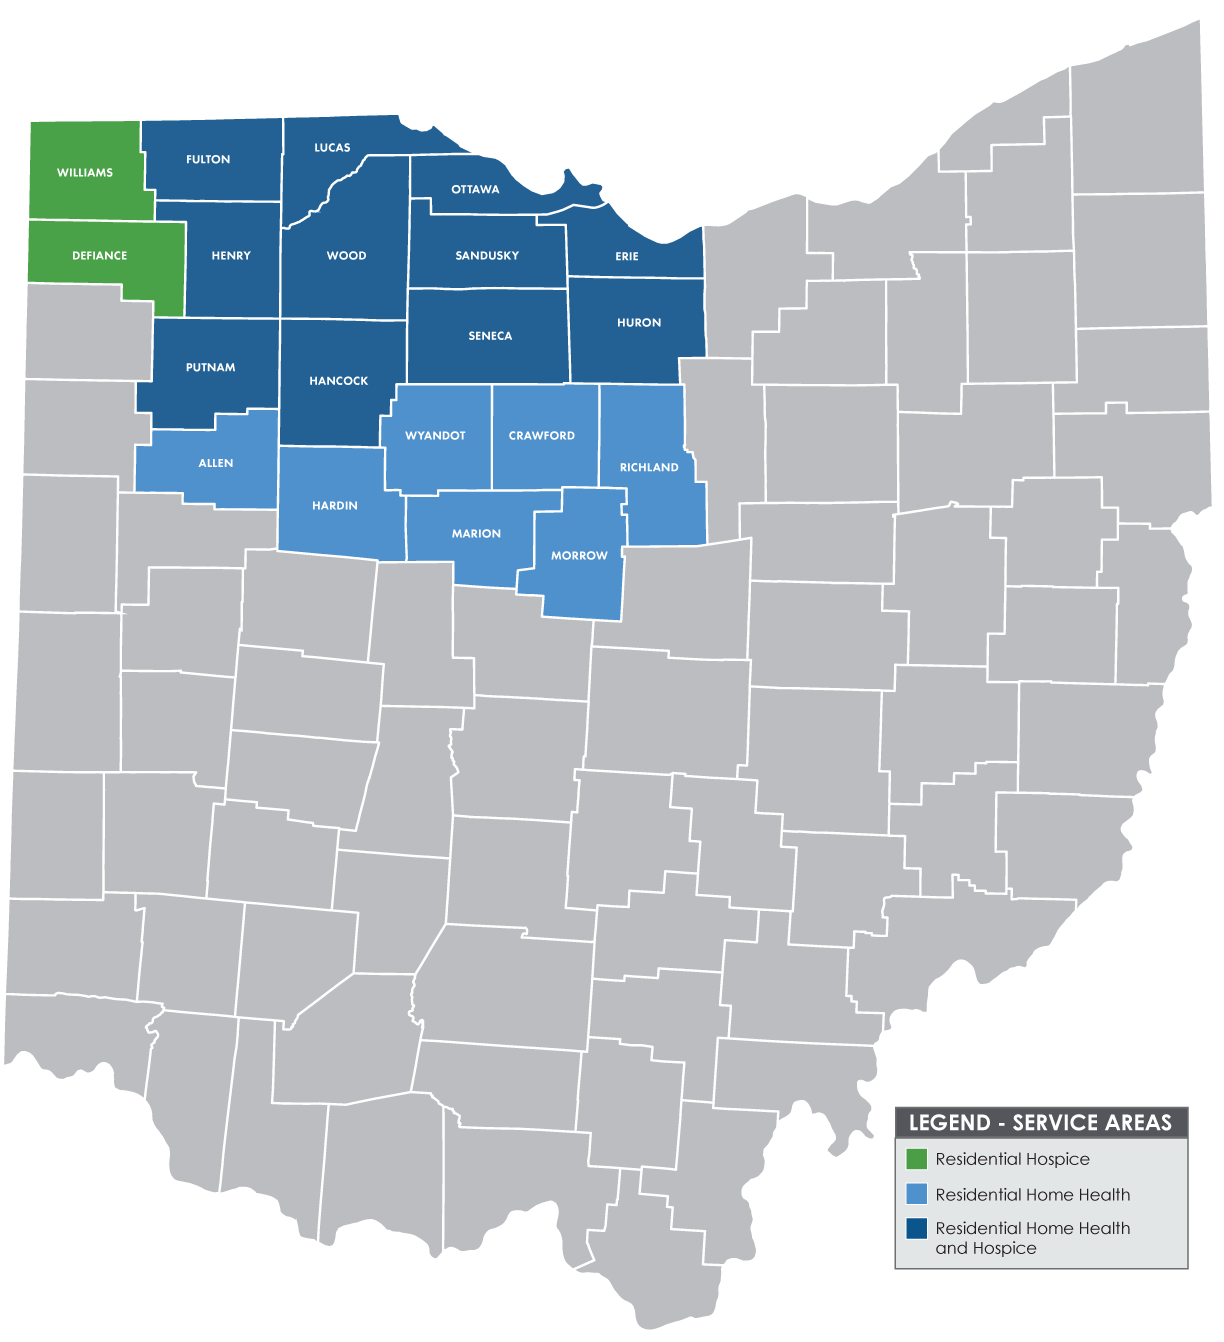 Residential Home Health and Hospice service areas in Ohio